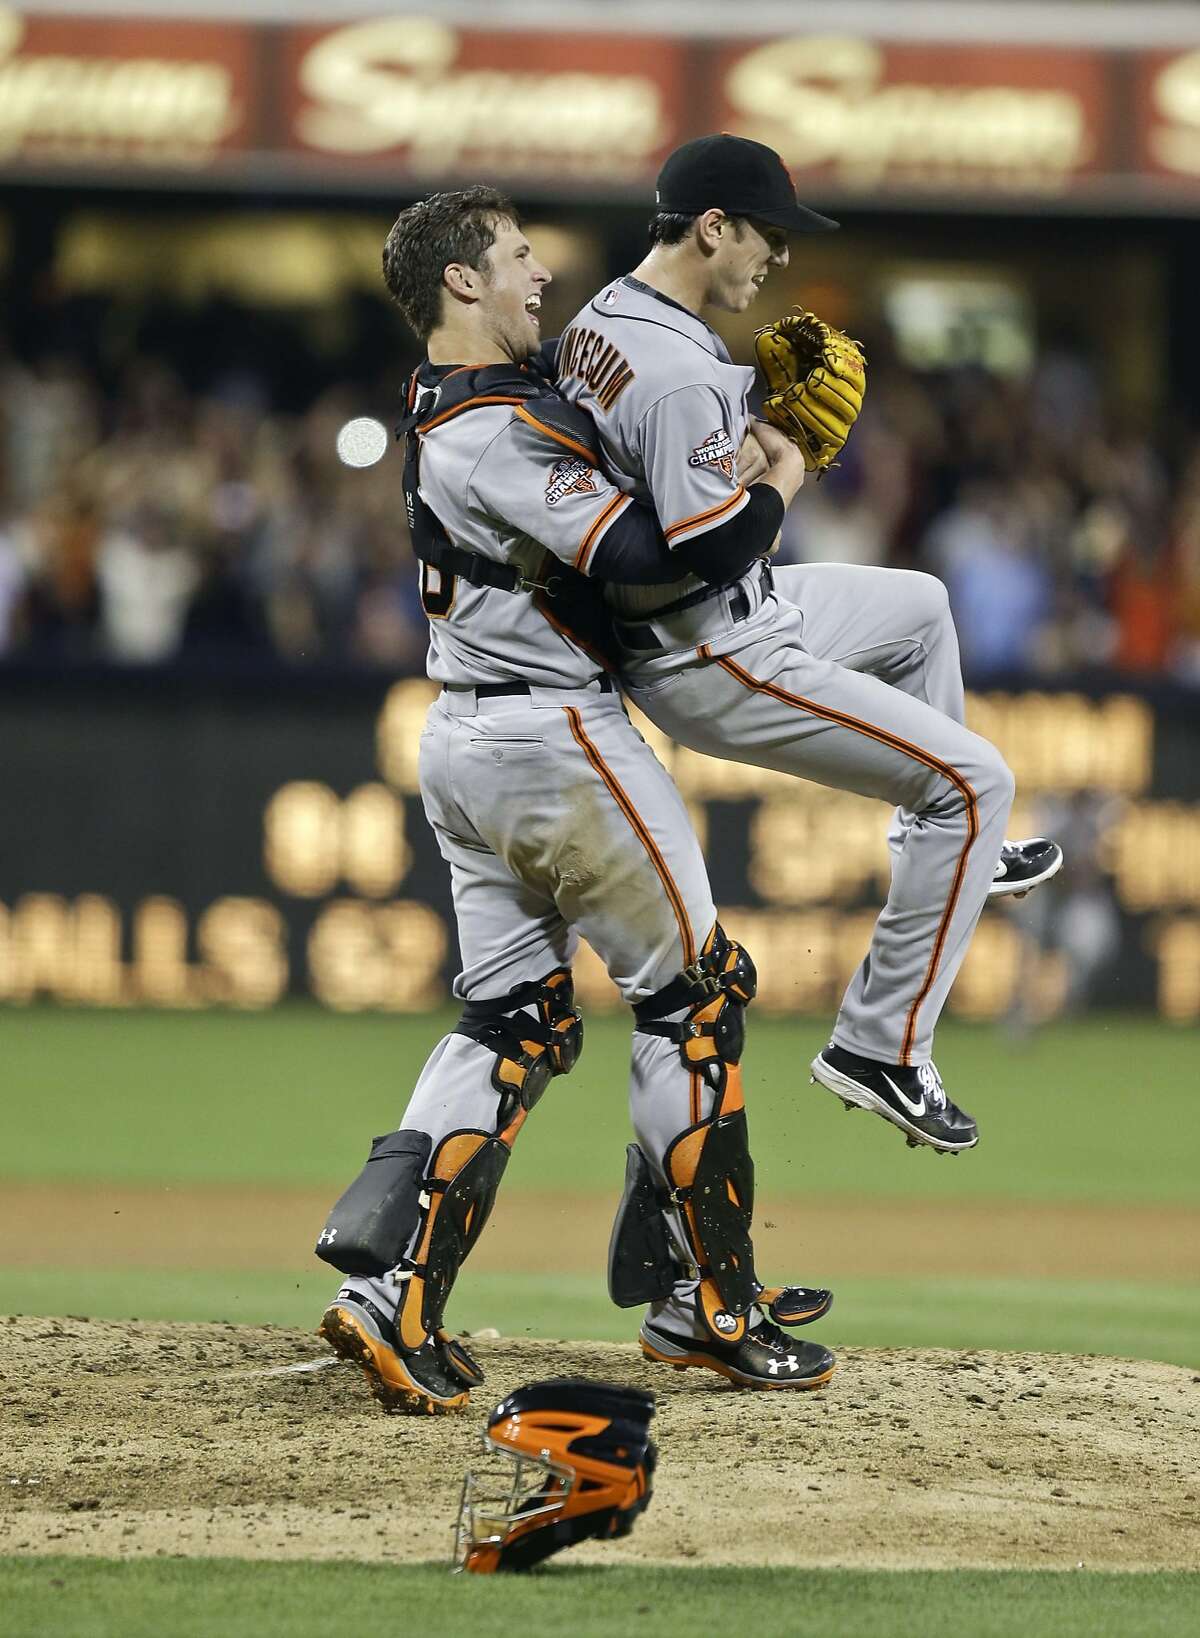 San Francisco Giants starting pitcher Tim Lincecum gets lifted by catcher Buster Posey after his no hit game against the San Diego Padres in a baseball game in San Diego, Saturday, July 13, 2013. The Giants won the game 9-0. Tim Lincecum has thrown his first career no-hitter and the second in the majors in 11 days, a gem saved by a spectacular diving catch by right fielder Hunter Pence in the San Francisco Giants' 9-0 win against the last-place San Diego Padres on Saturday night. (AP Photo/Lenny Ignelzi)